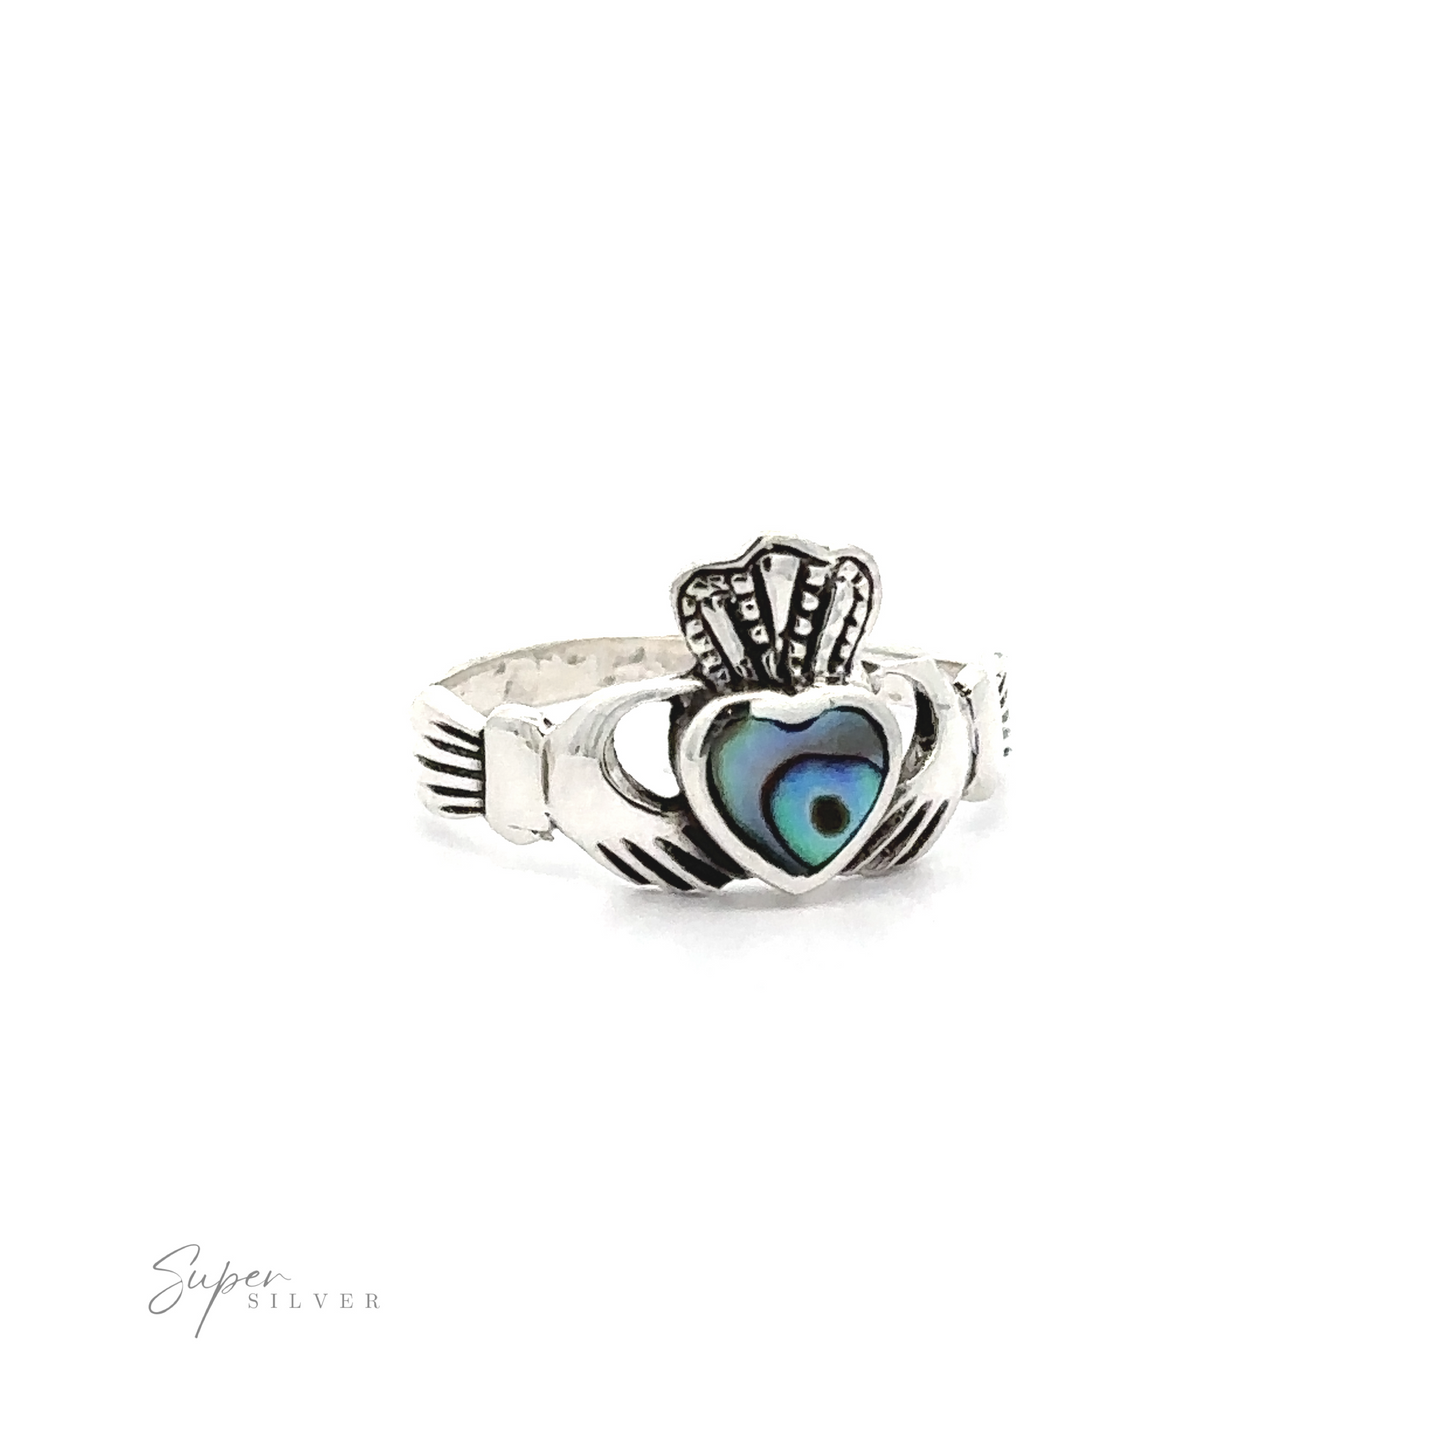 
                  
                    Claddagh Inlaid Stone Ring featuring a heart-shaped blue gemstone, with hands and a crowned heart design symbolizing Irish heritage, presented against a white background.
                  
                